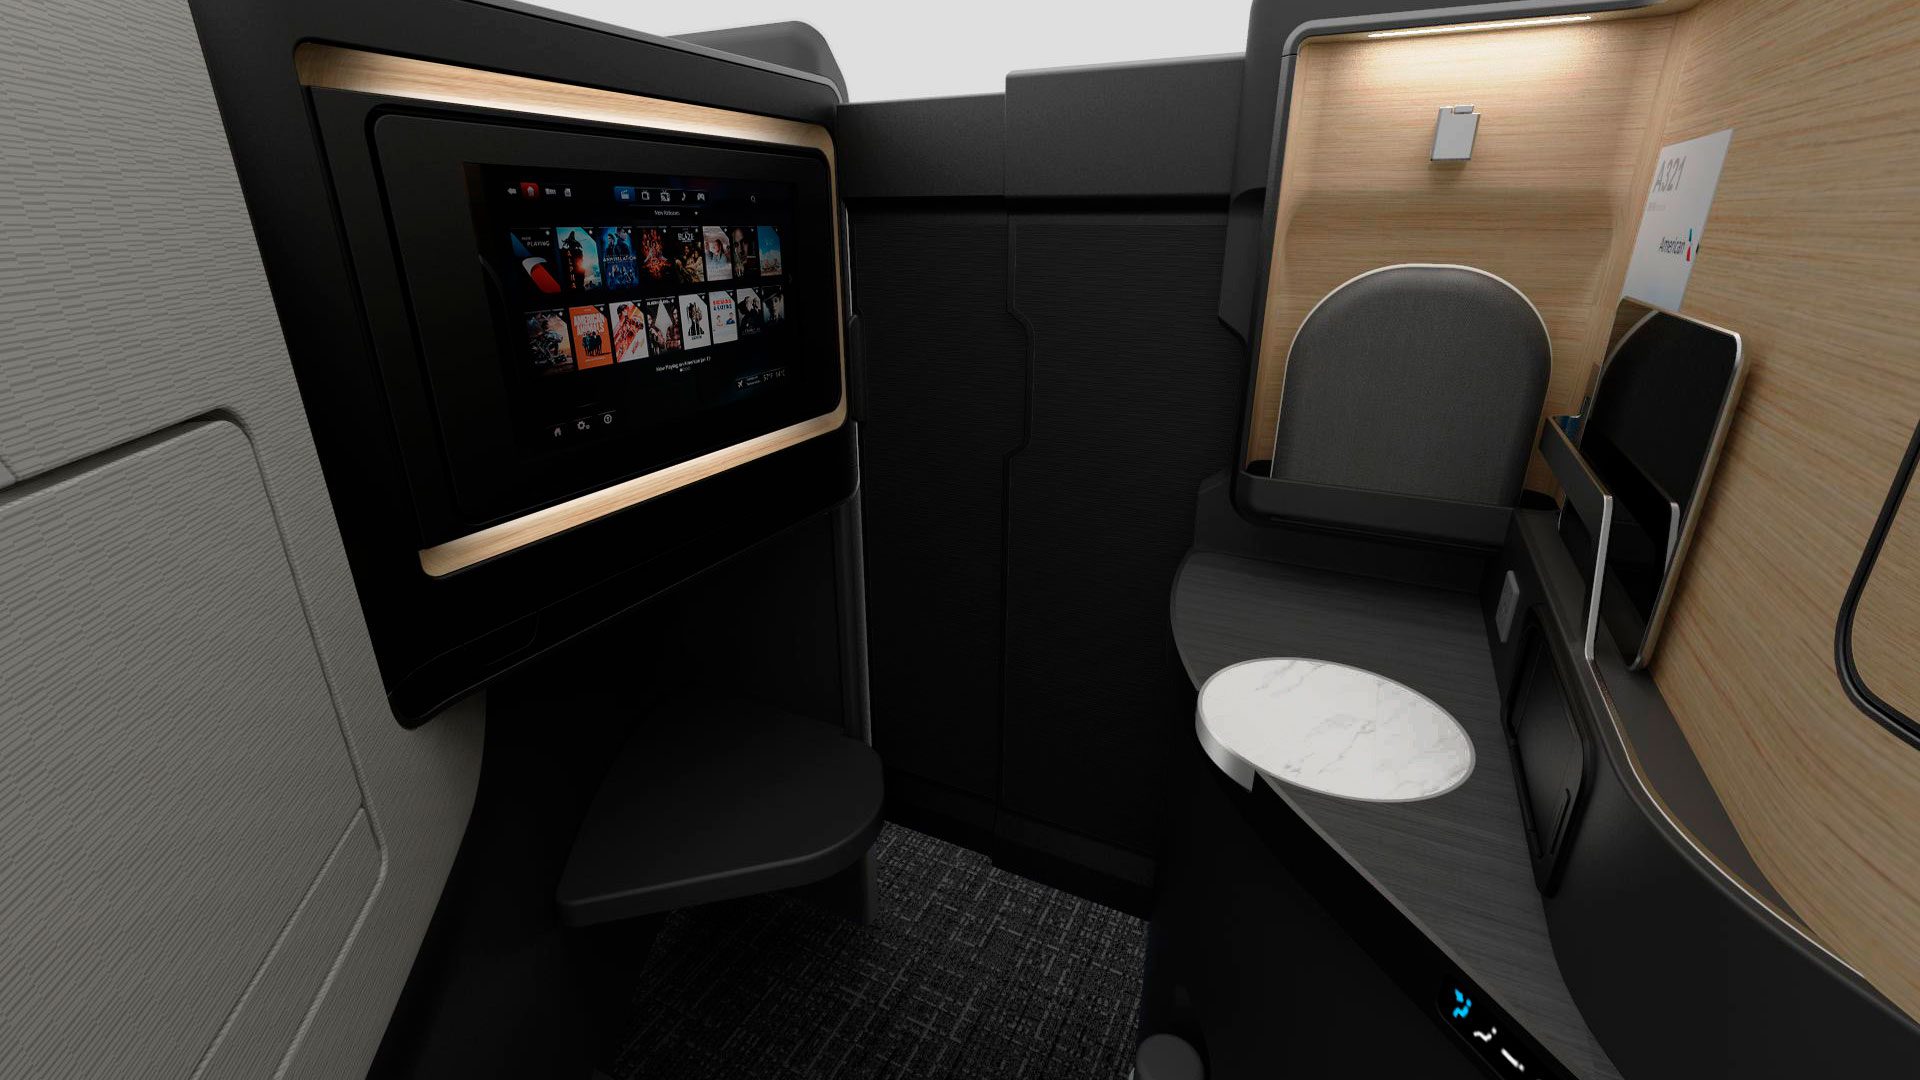 The Airbus A321XLR Flagship Suite will provide customers with a special in-flight experience